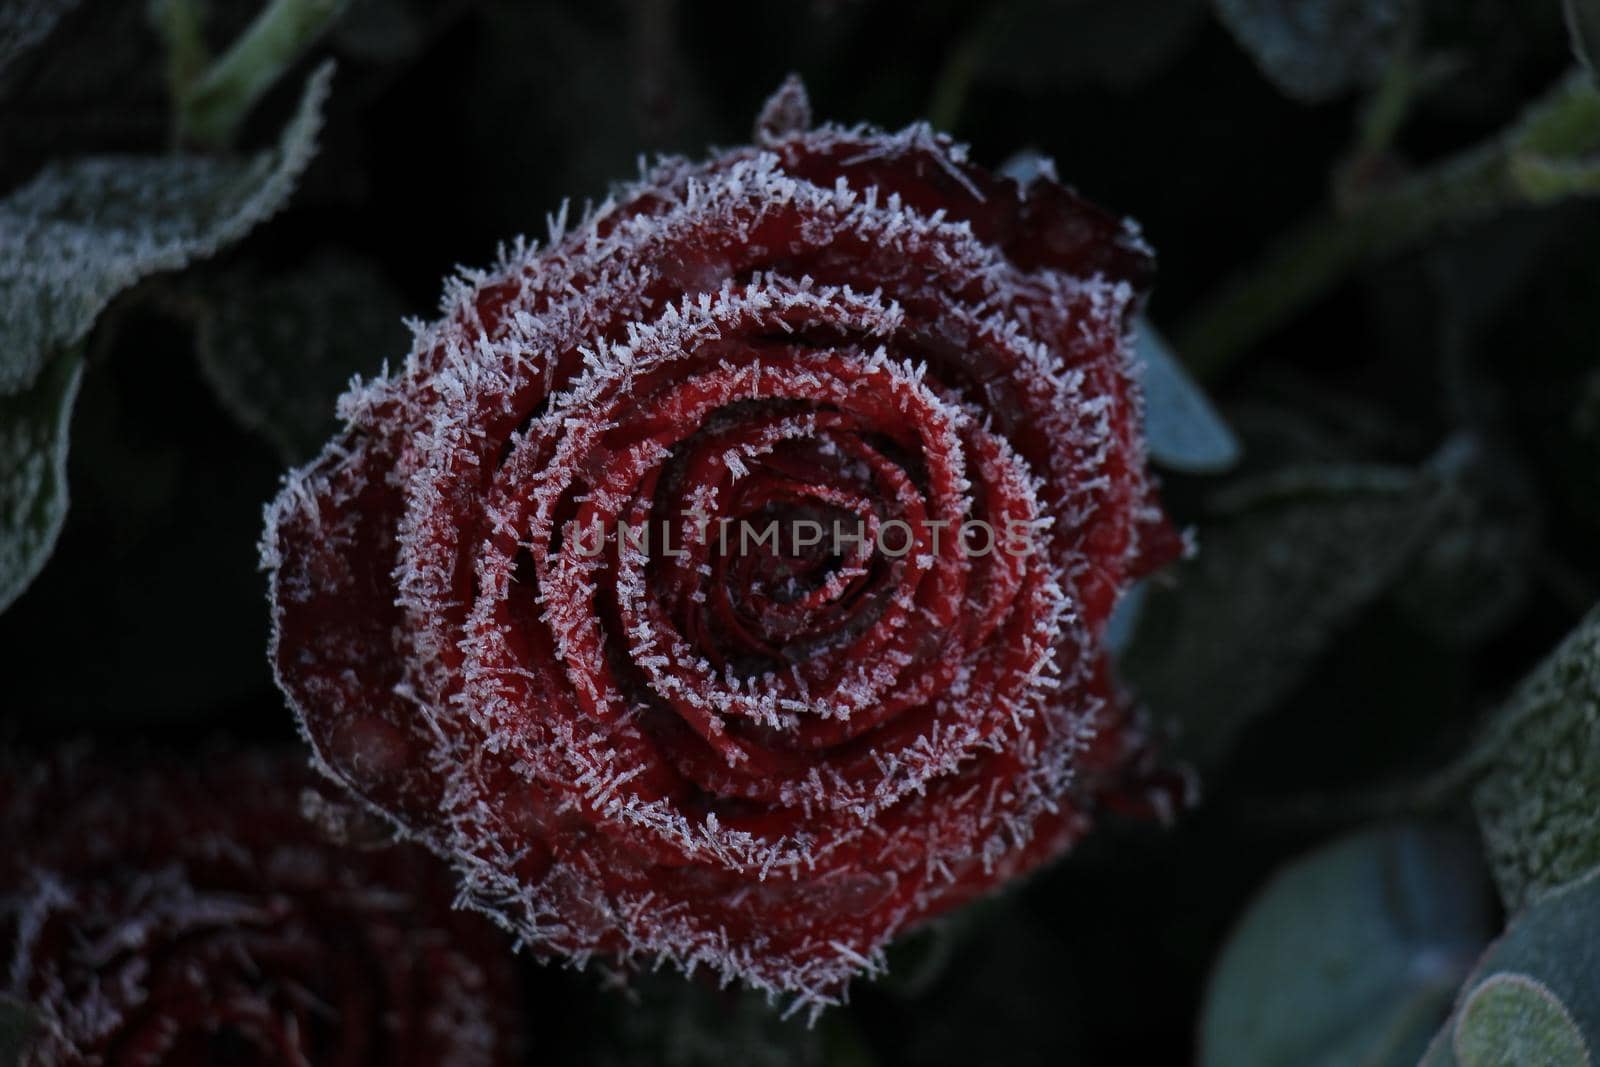 White hoar frost on a single red rose by studioportosabbia